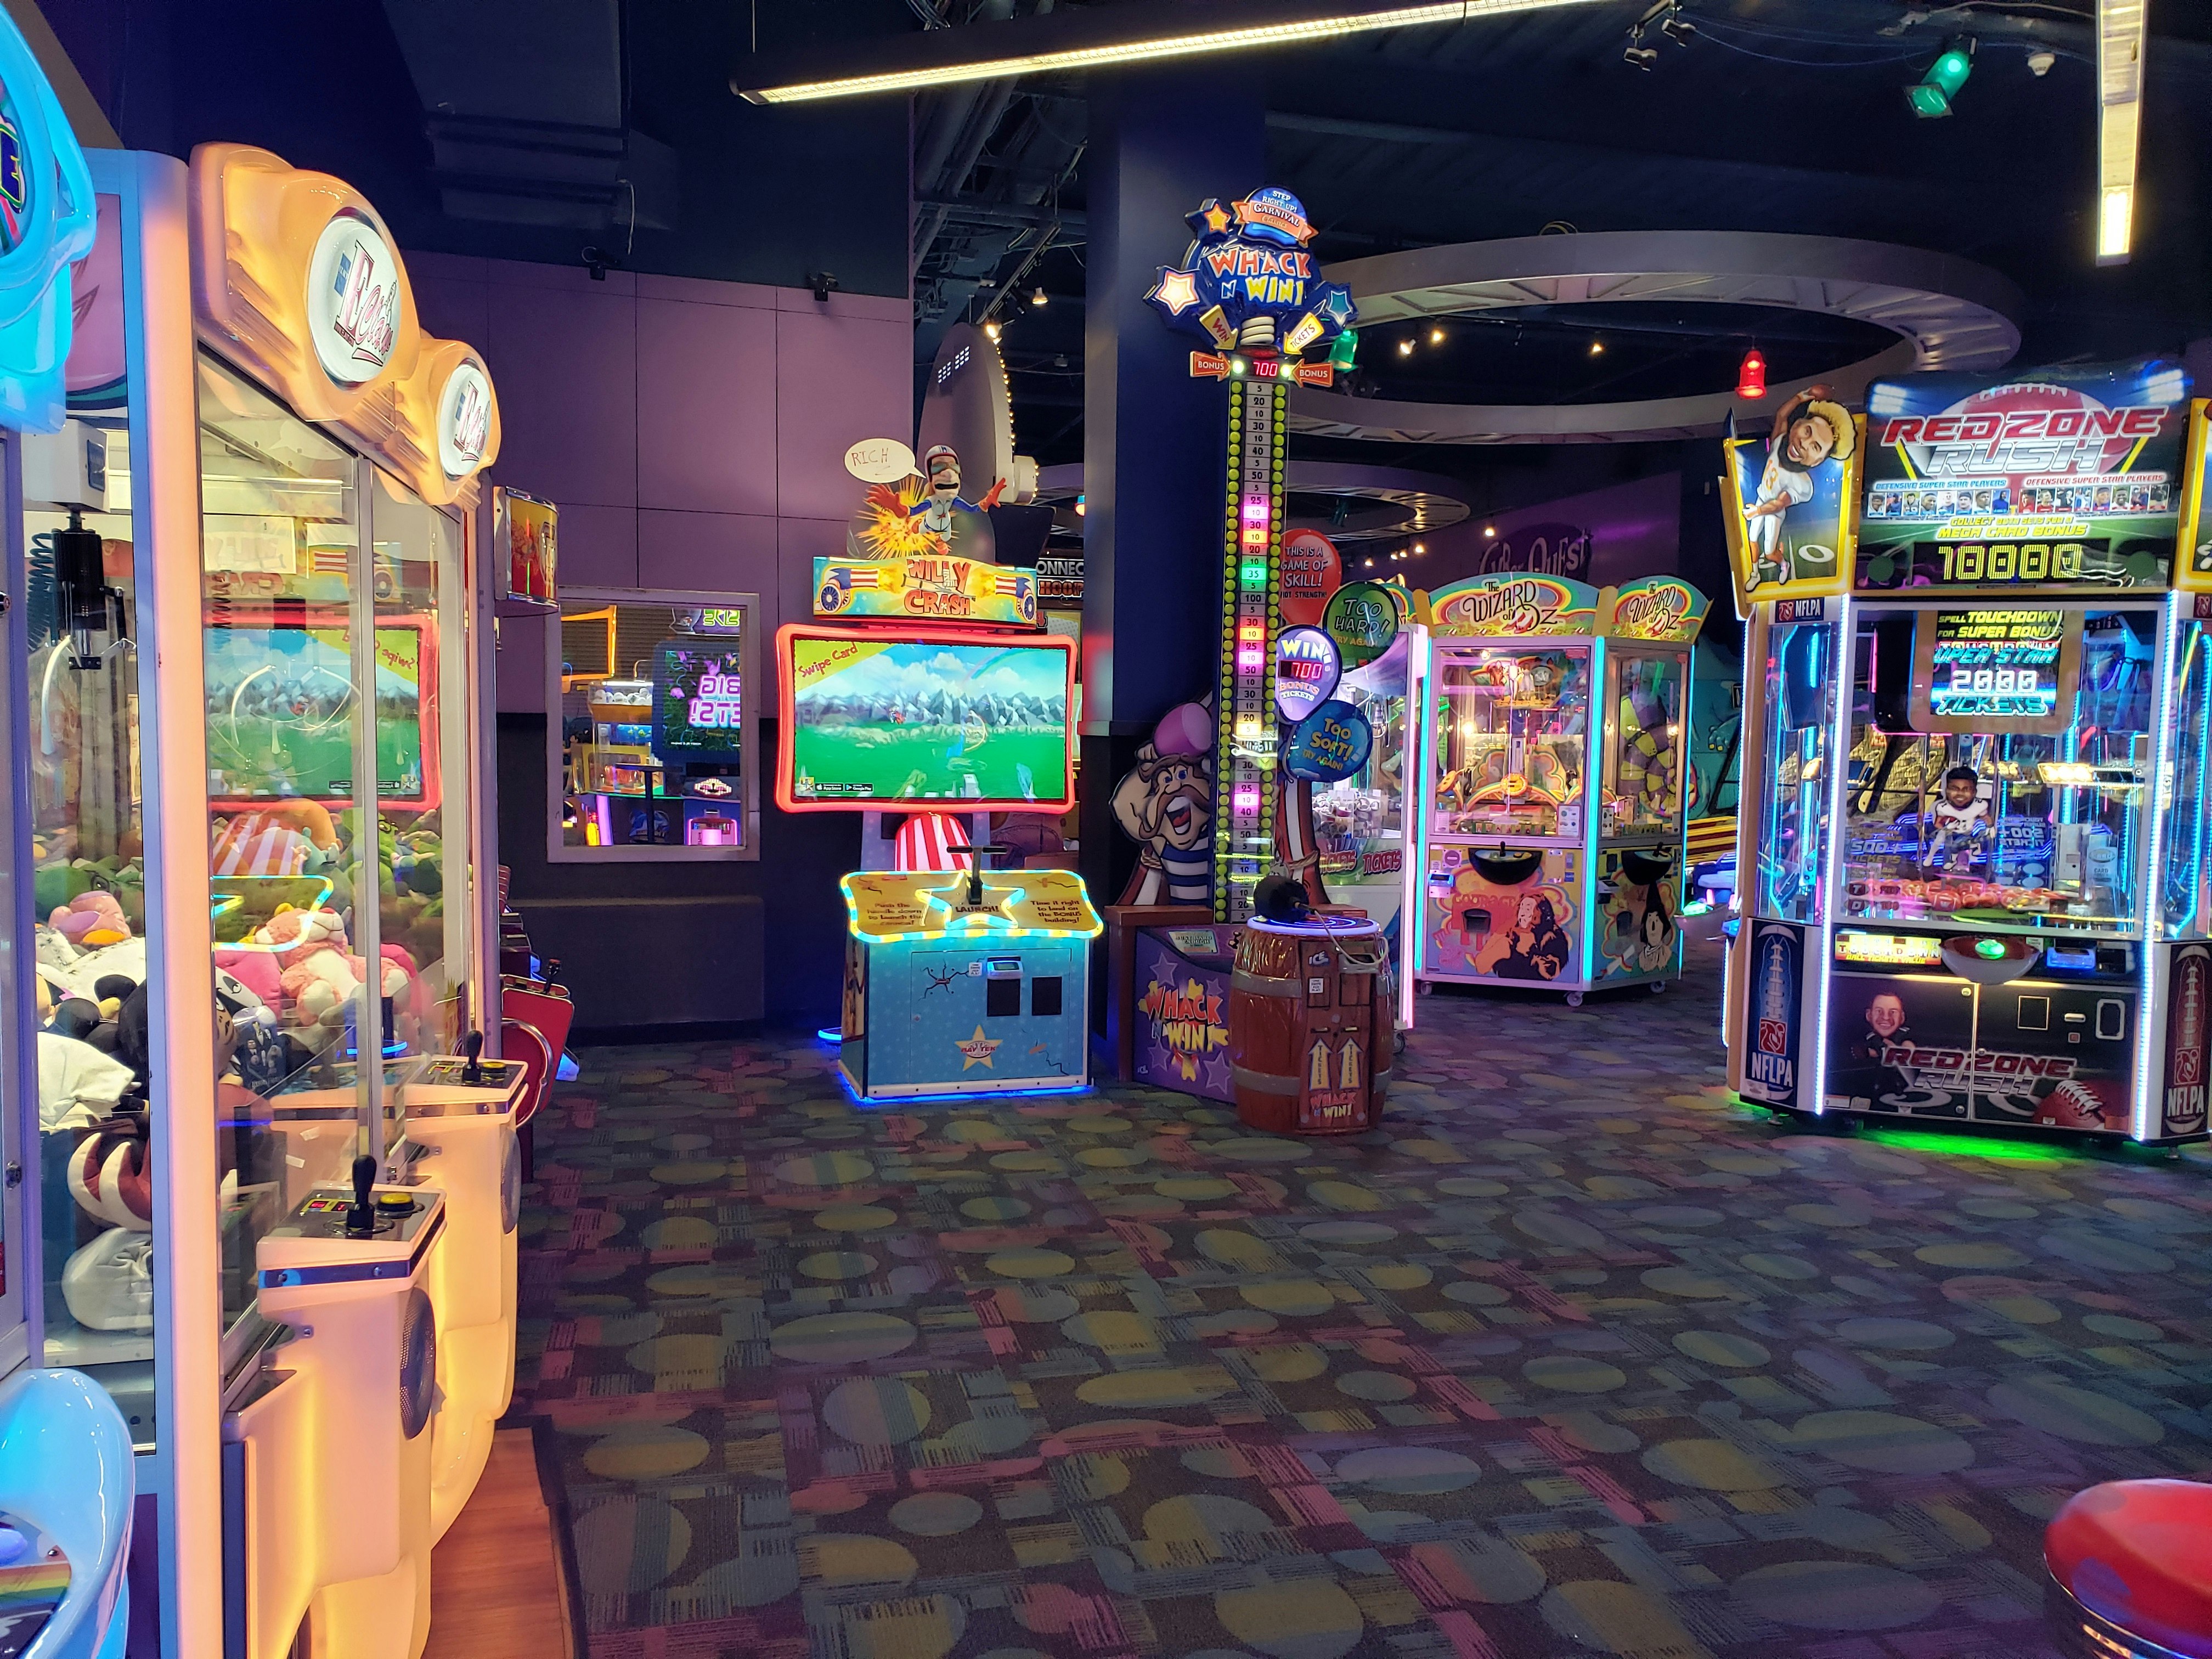 The Kids Quest area at Mohegan Sun is full of colorful arcade games, crane machines, and carnival attractions set against light purple walls and an abstract patterned carpet in shades of purple and green